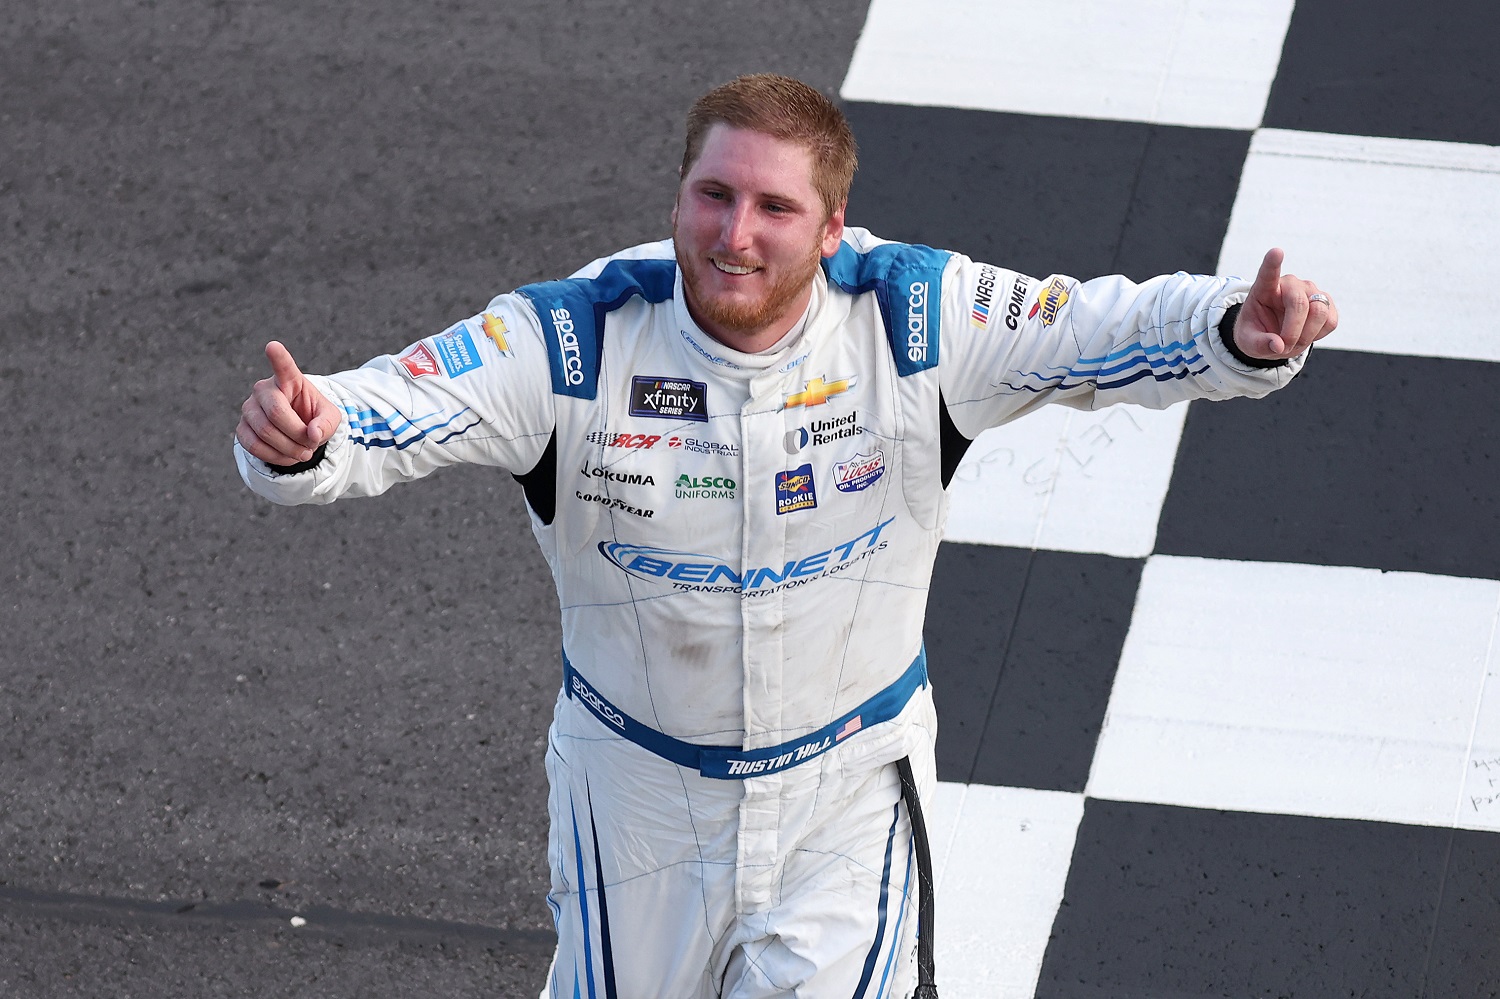 Austin Hill celebrates after winning the NASCAR Xfinity Series Alsco Uniforms 250 at Atlanta Motor Speedway on July 9, 2022. | James Gilbert/Getty Images